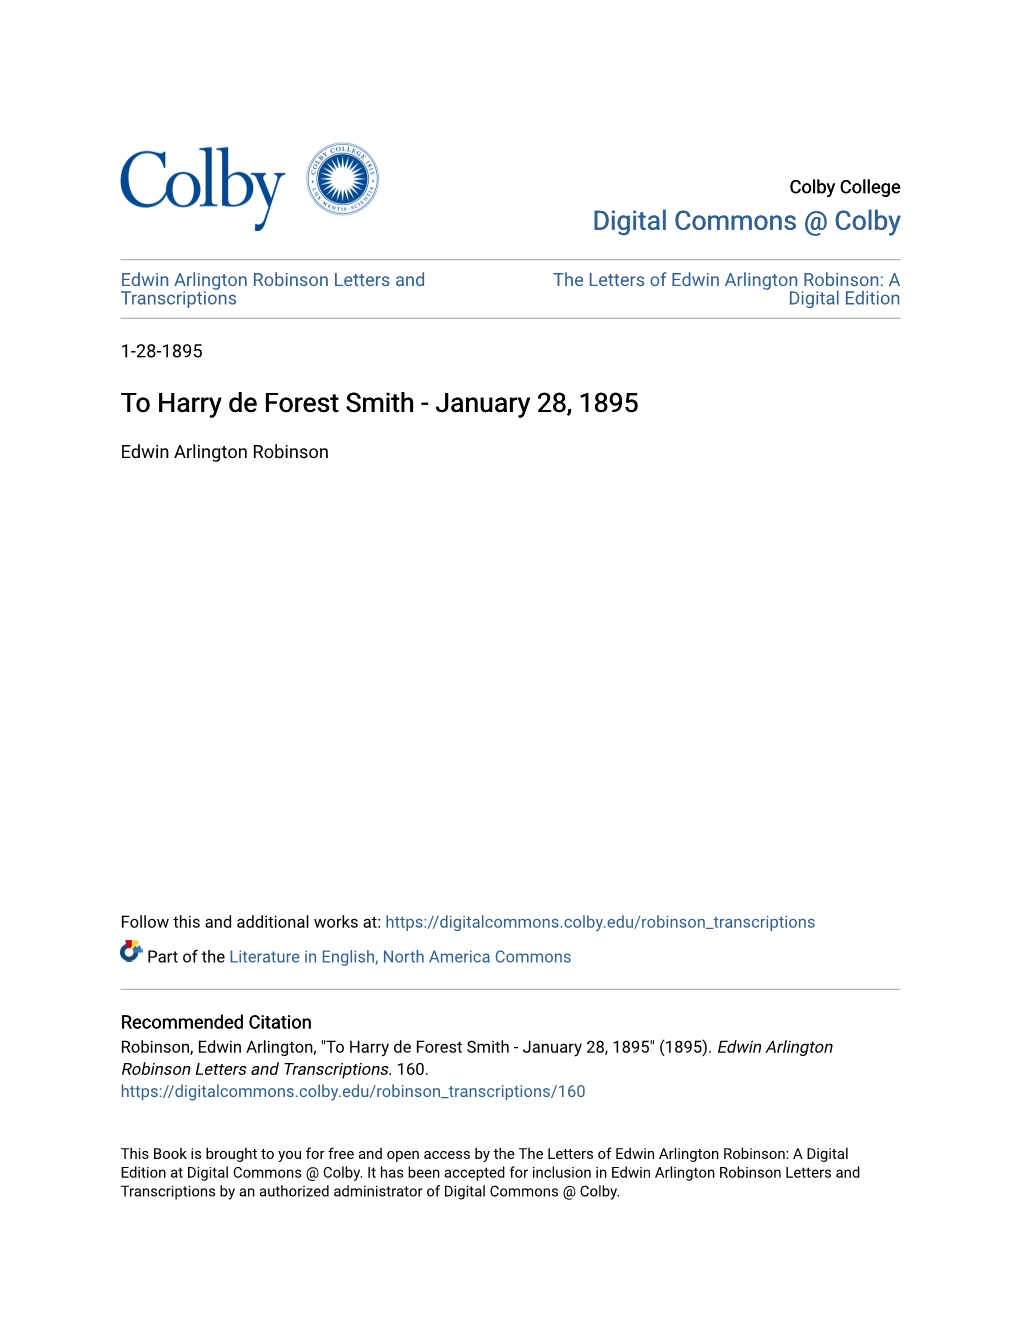 To Harry De Forest Smith - January 28, 1895